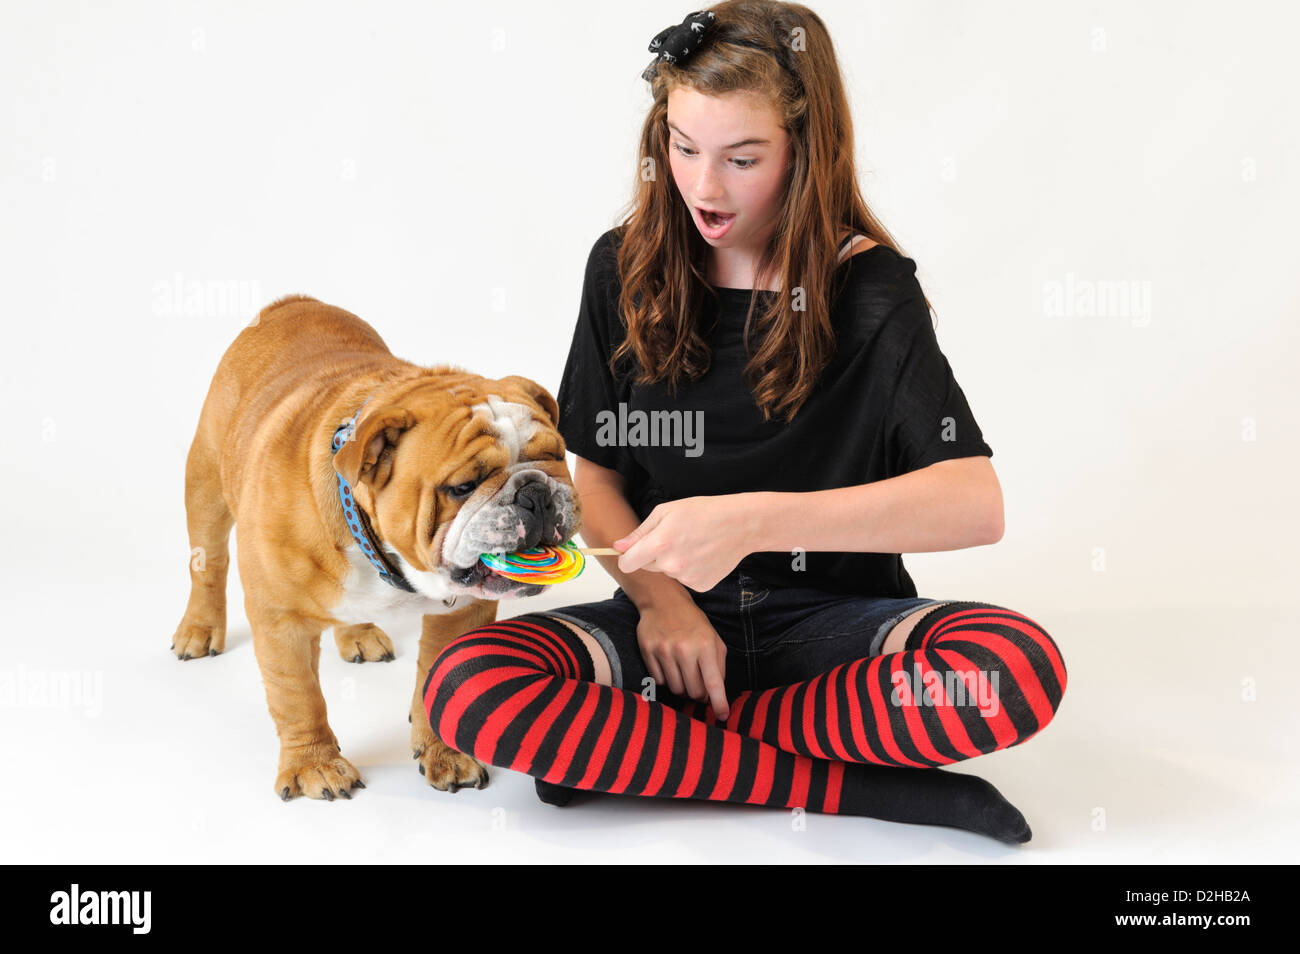 Young girl surprised at a dog snatching and licking her lollipop, a thirteen year old teenager and her pet bulldog. Stock Photo